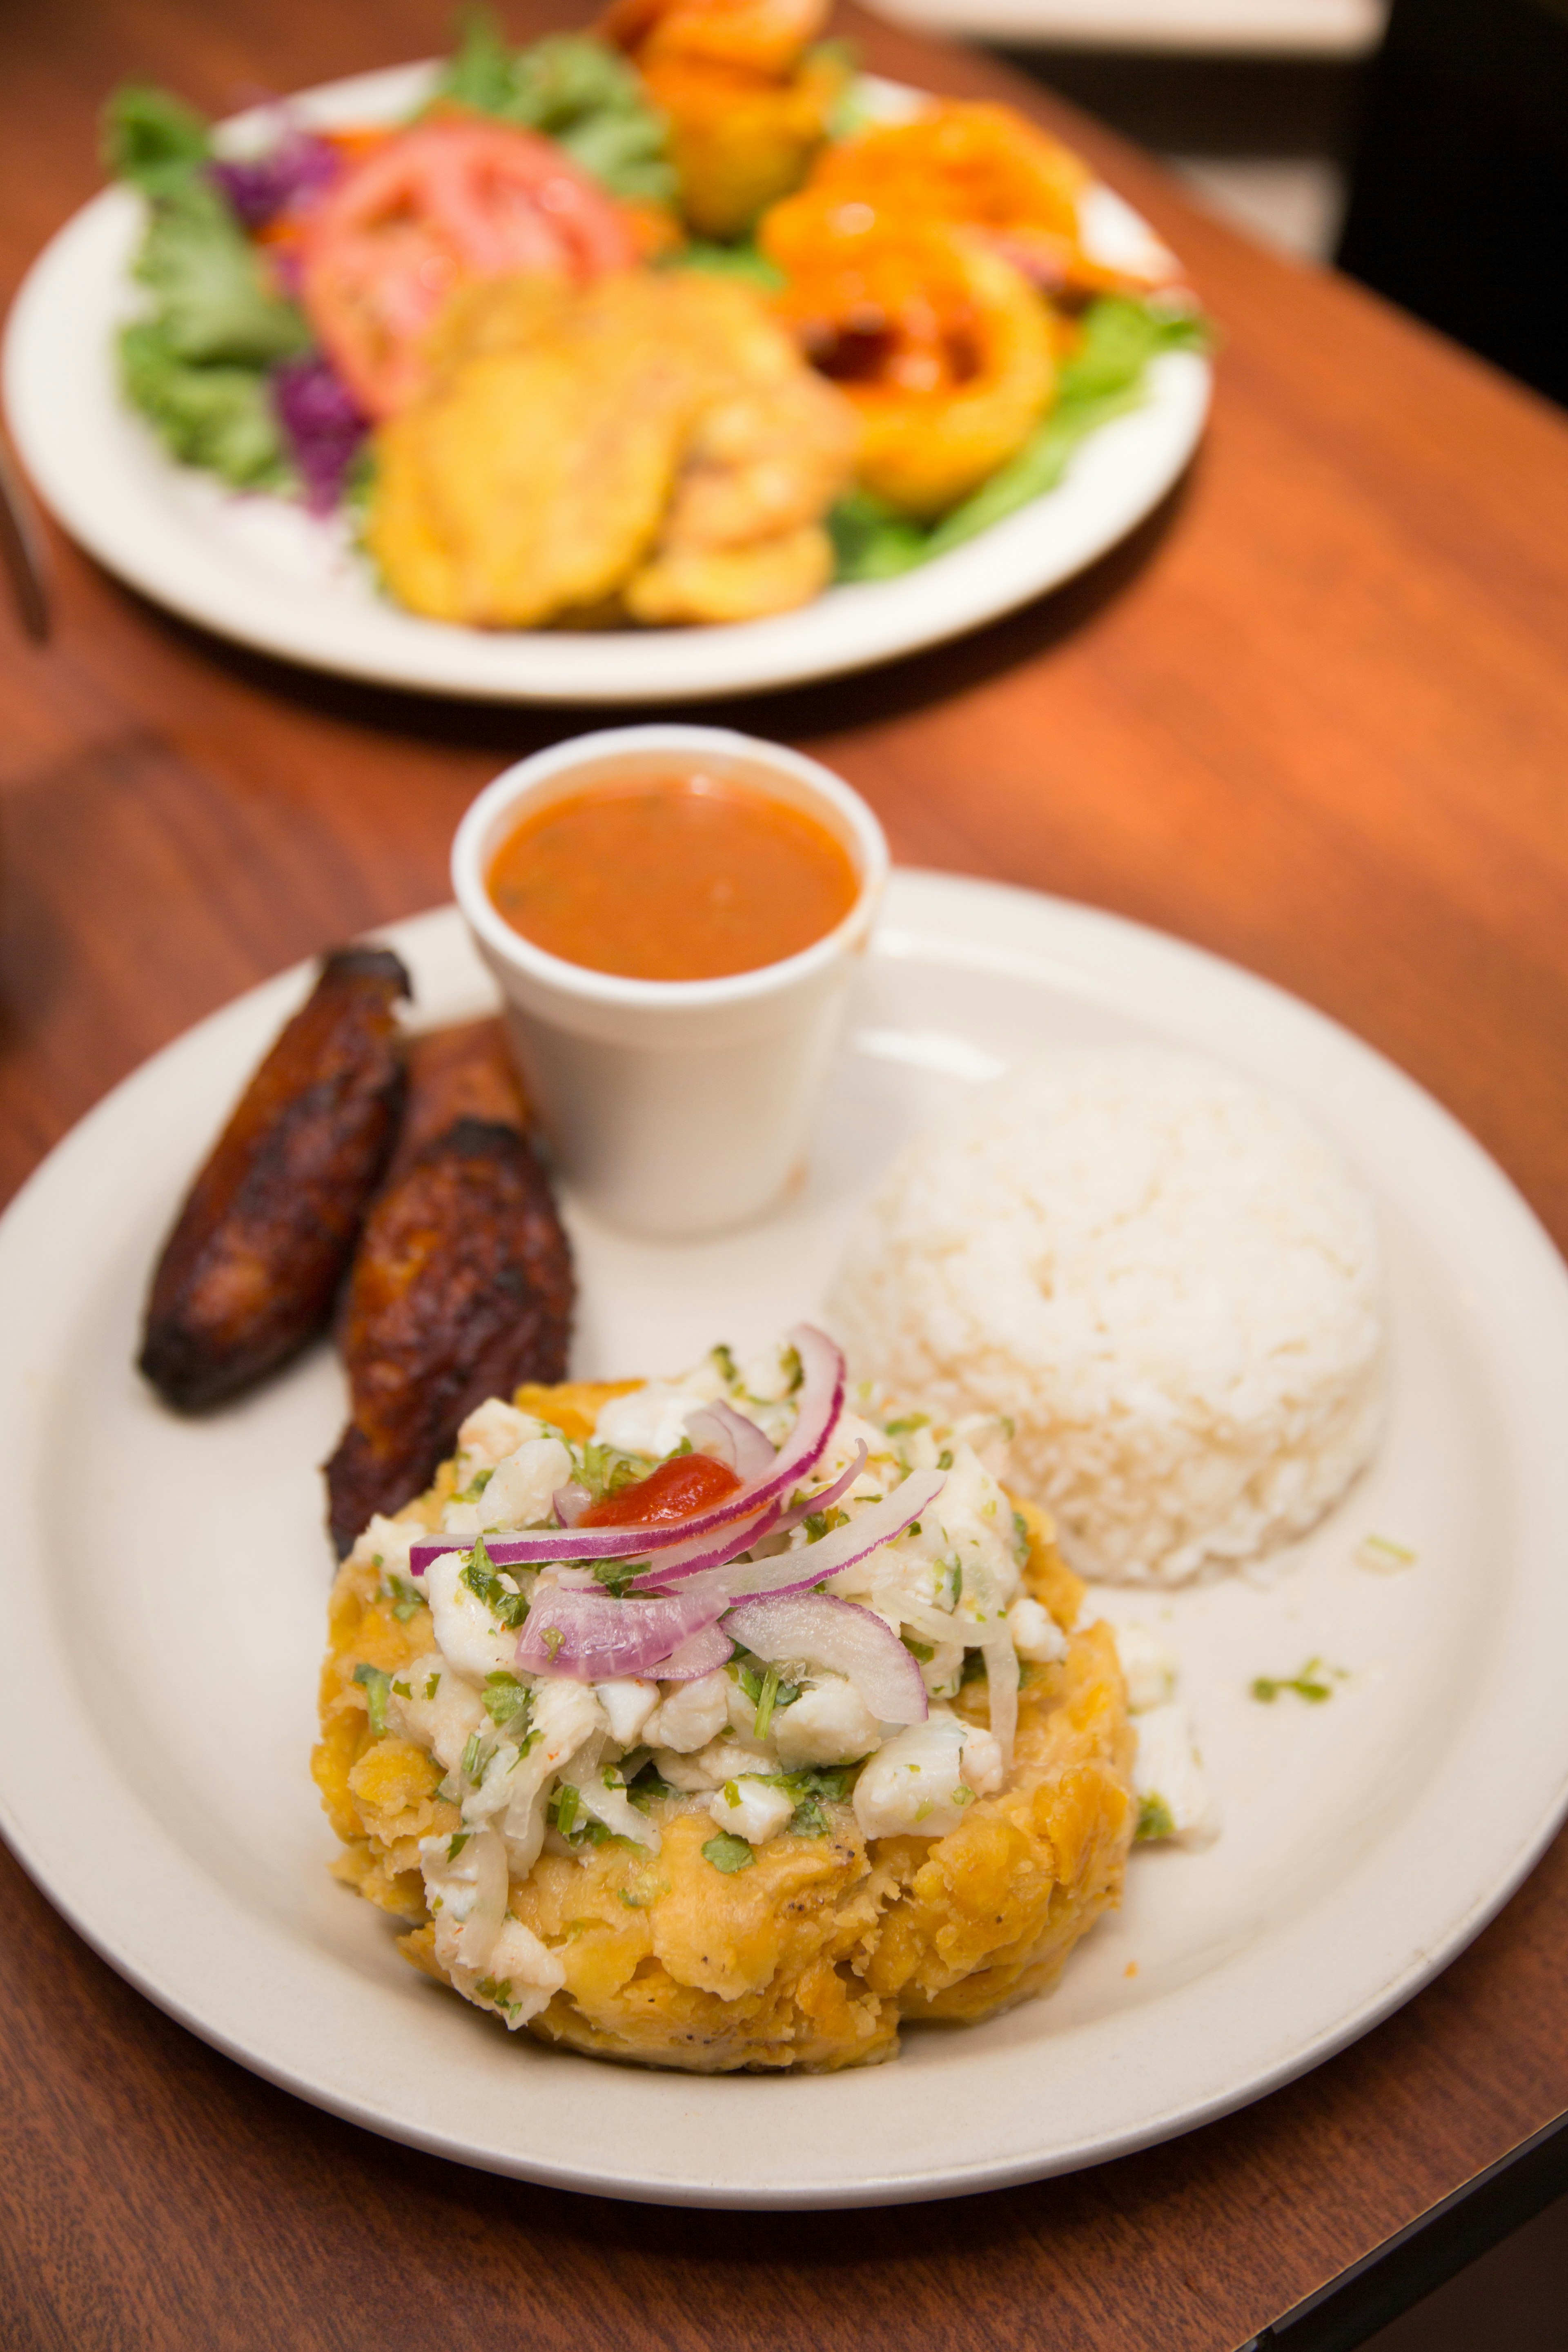 A white plate loaded with mofongo, a fried plantain dish, accompanied by rice and relish